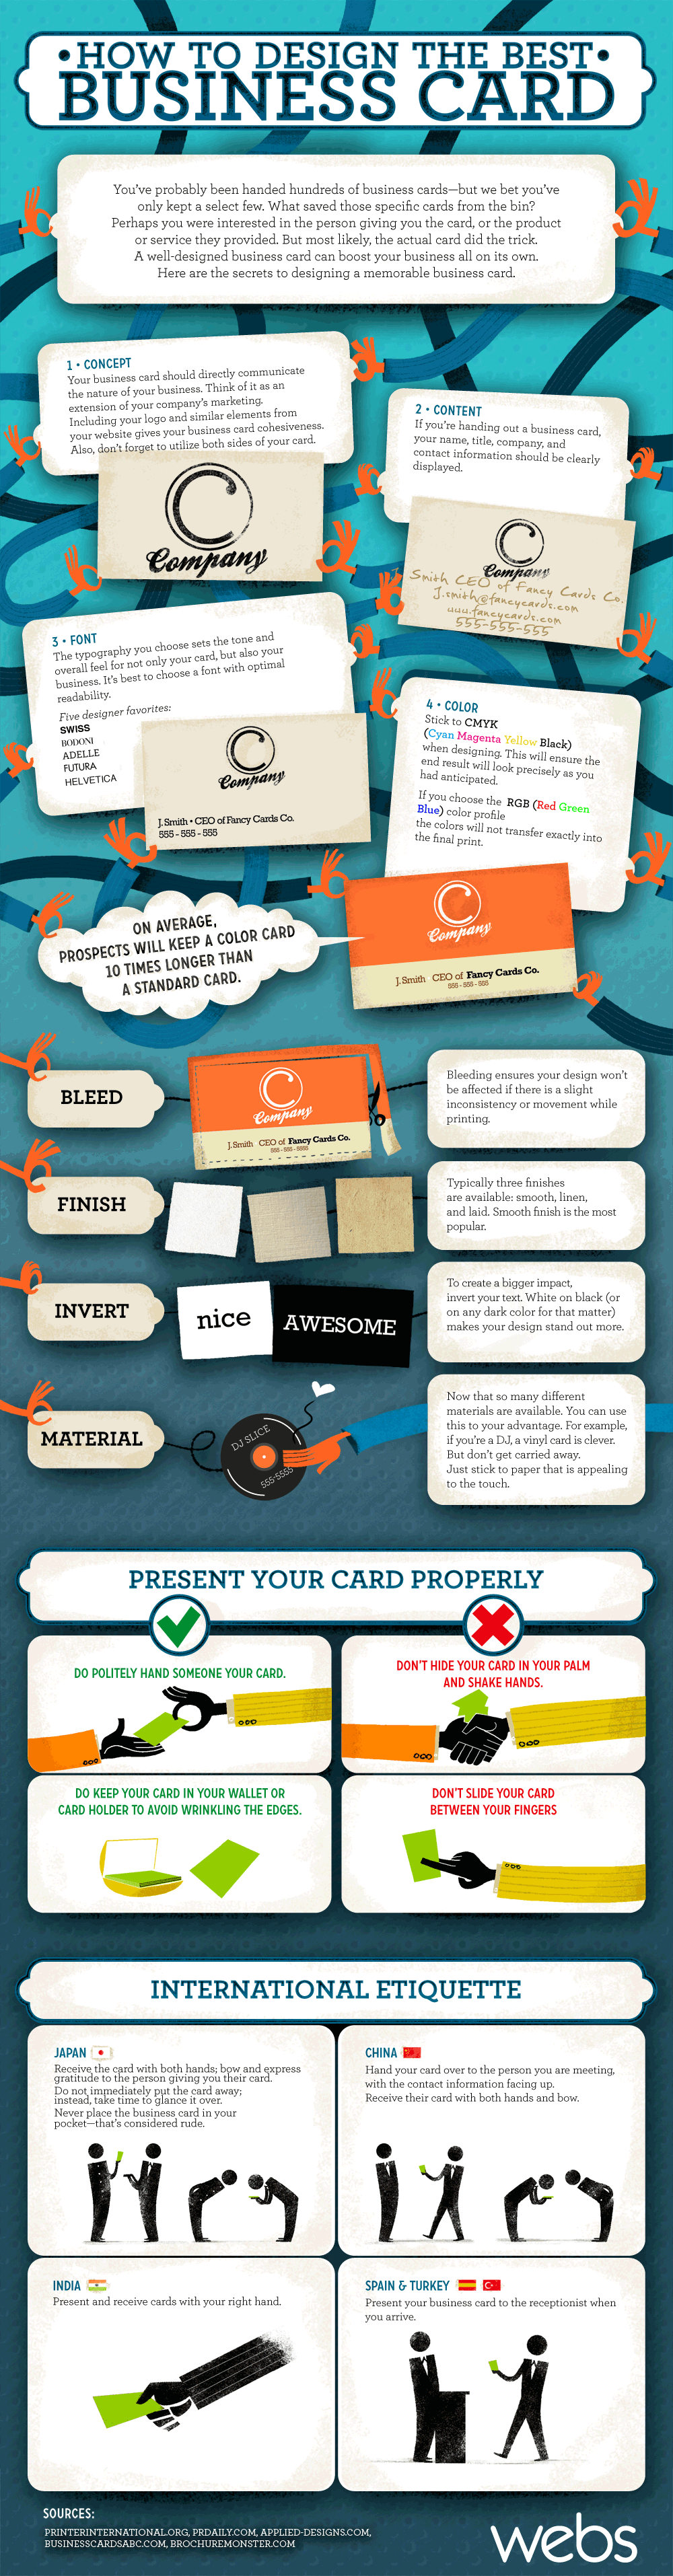 Business Card Design Tips-Infographic